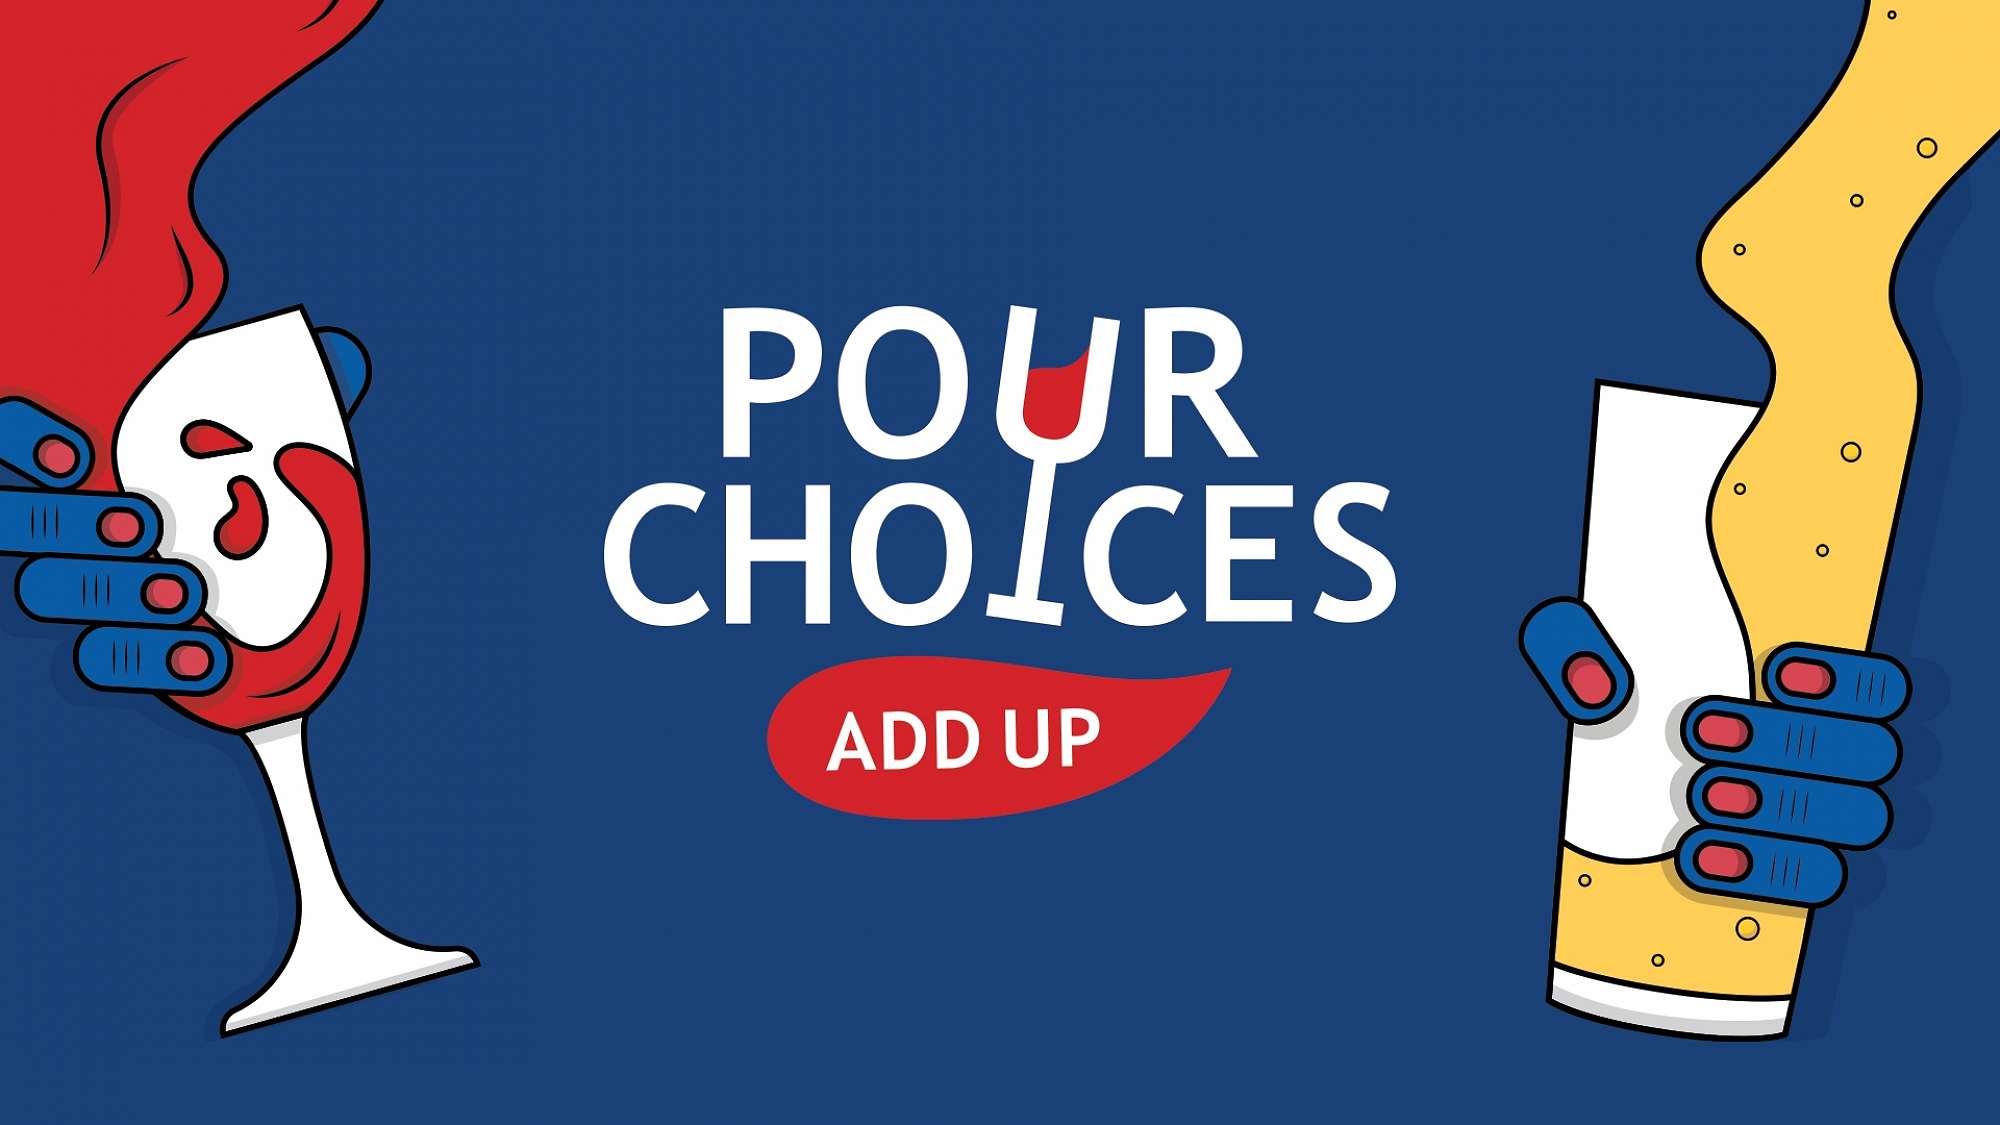 Pour Choices Add Up – Alcohol Awareness